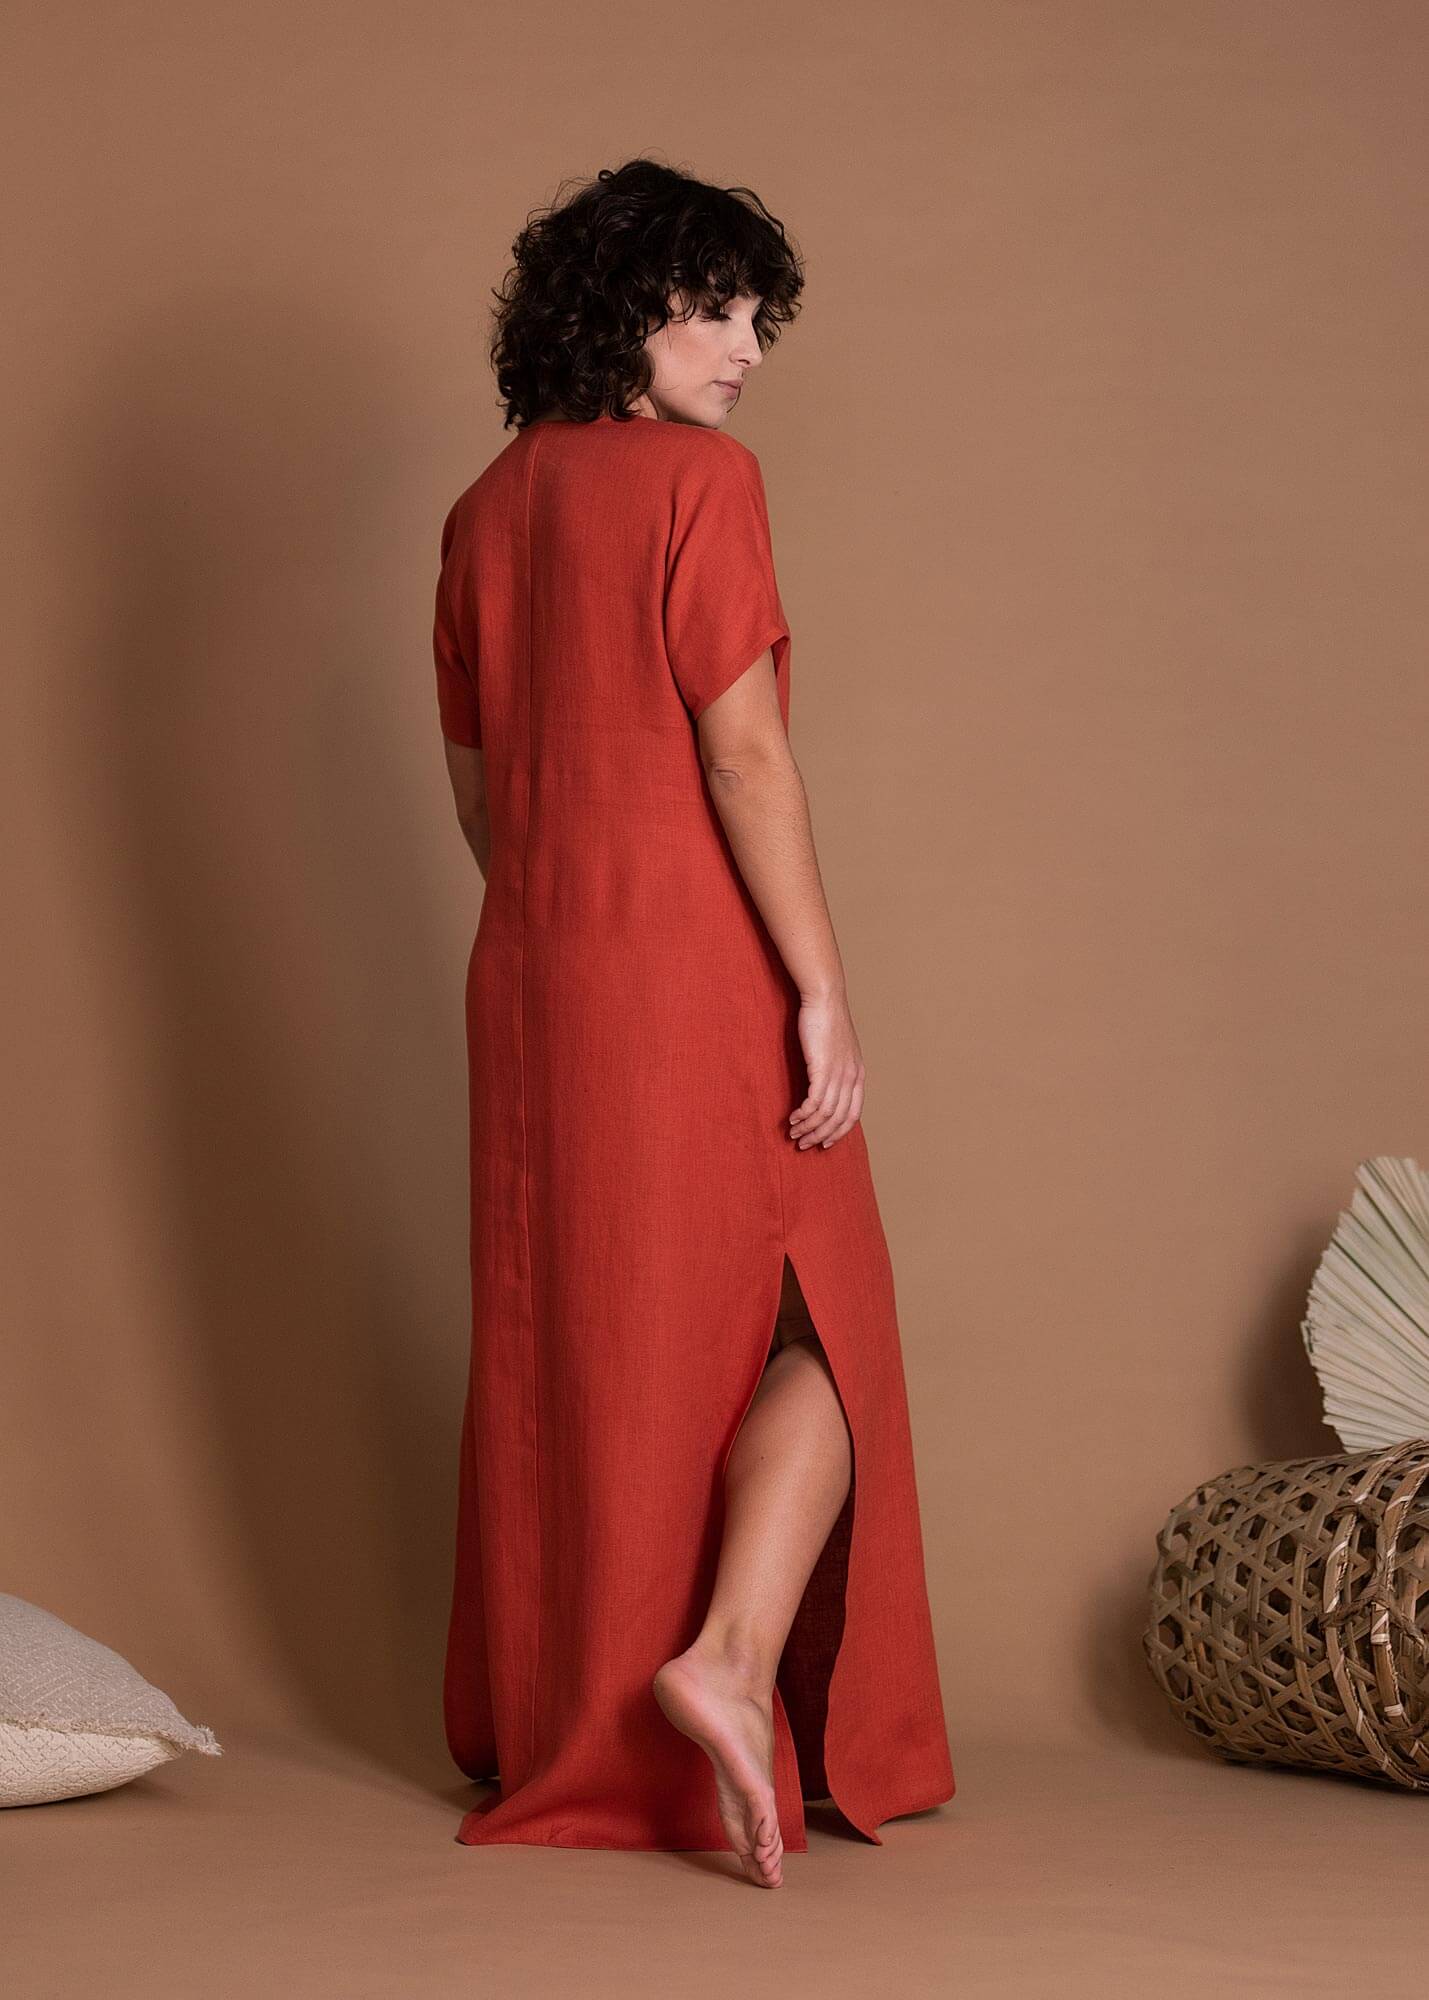 Long Red Linen Dress With Short Sleeves And Thin Belt